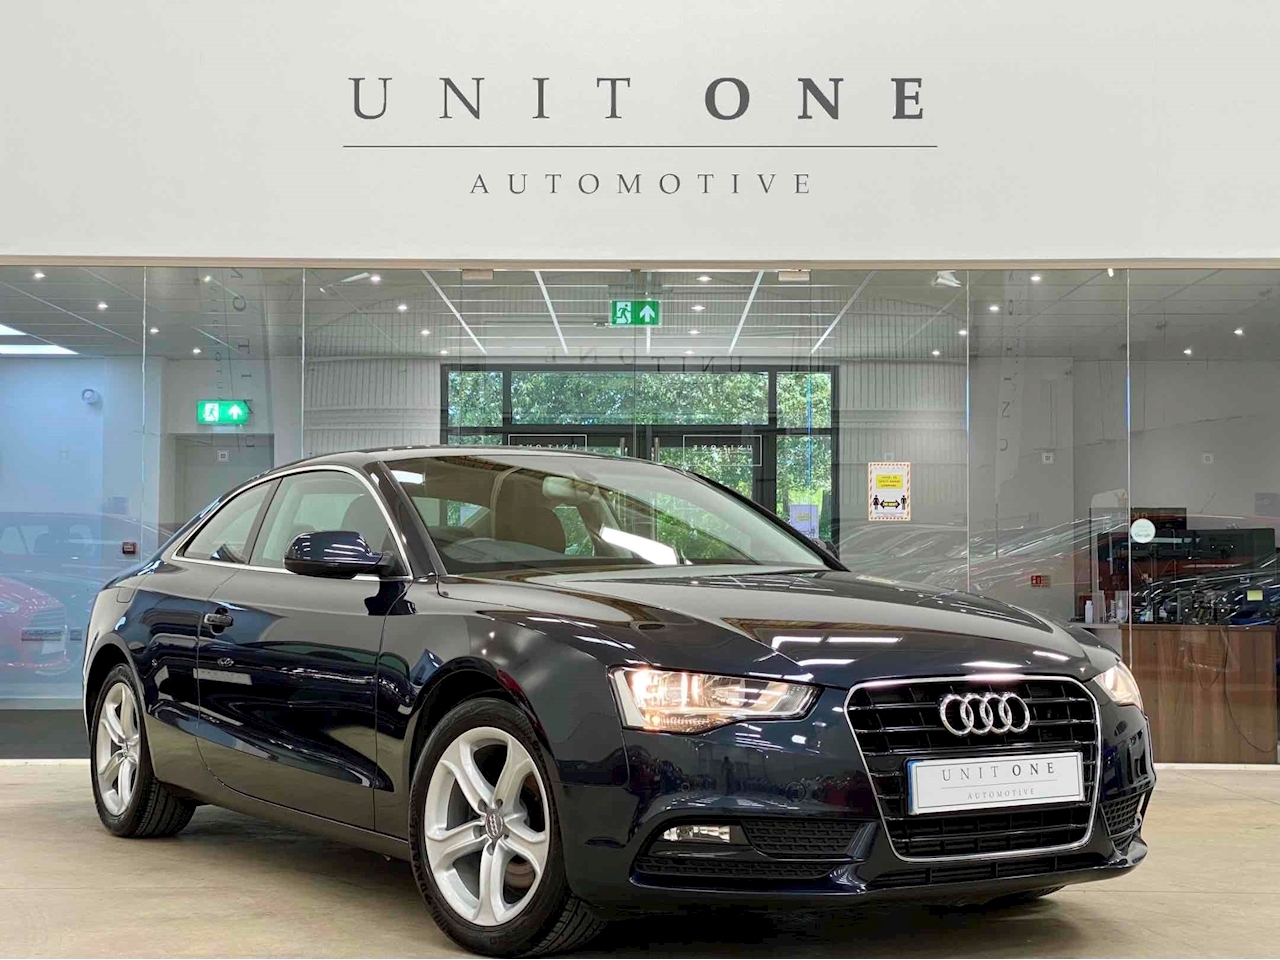 A5 TDI SE Coupe 2.0 Manual Diesel